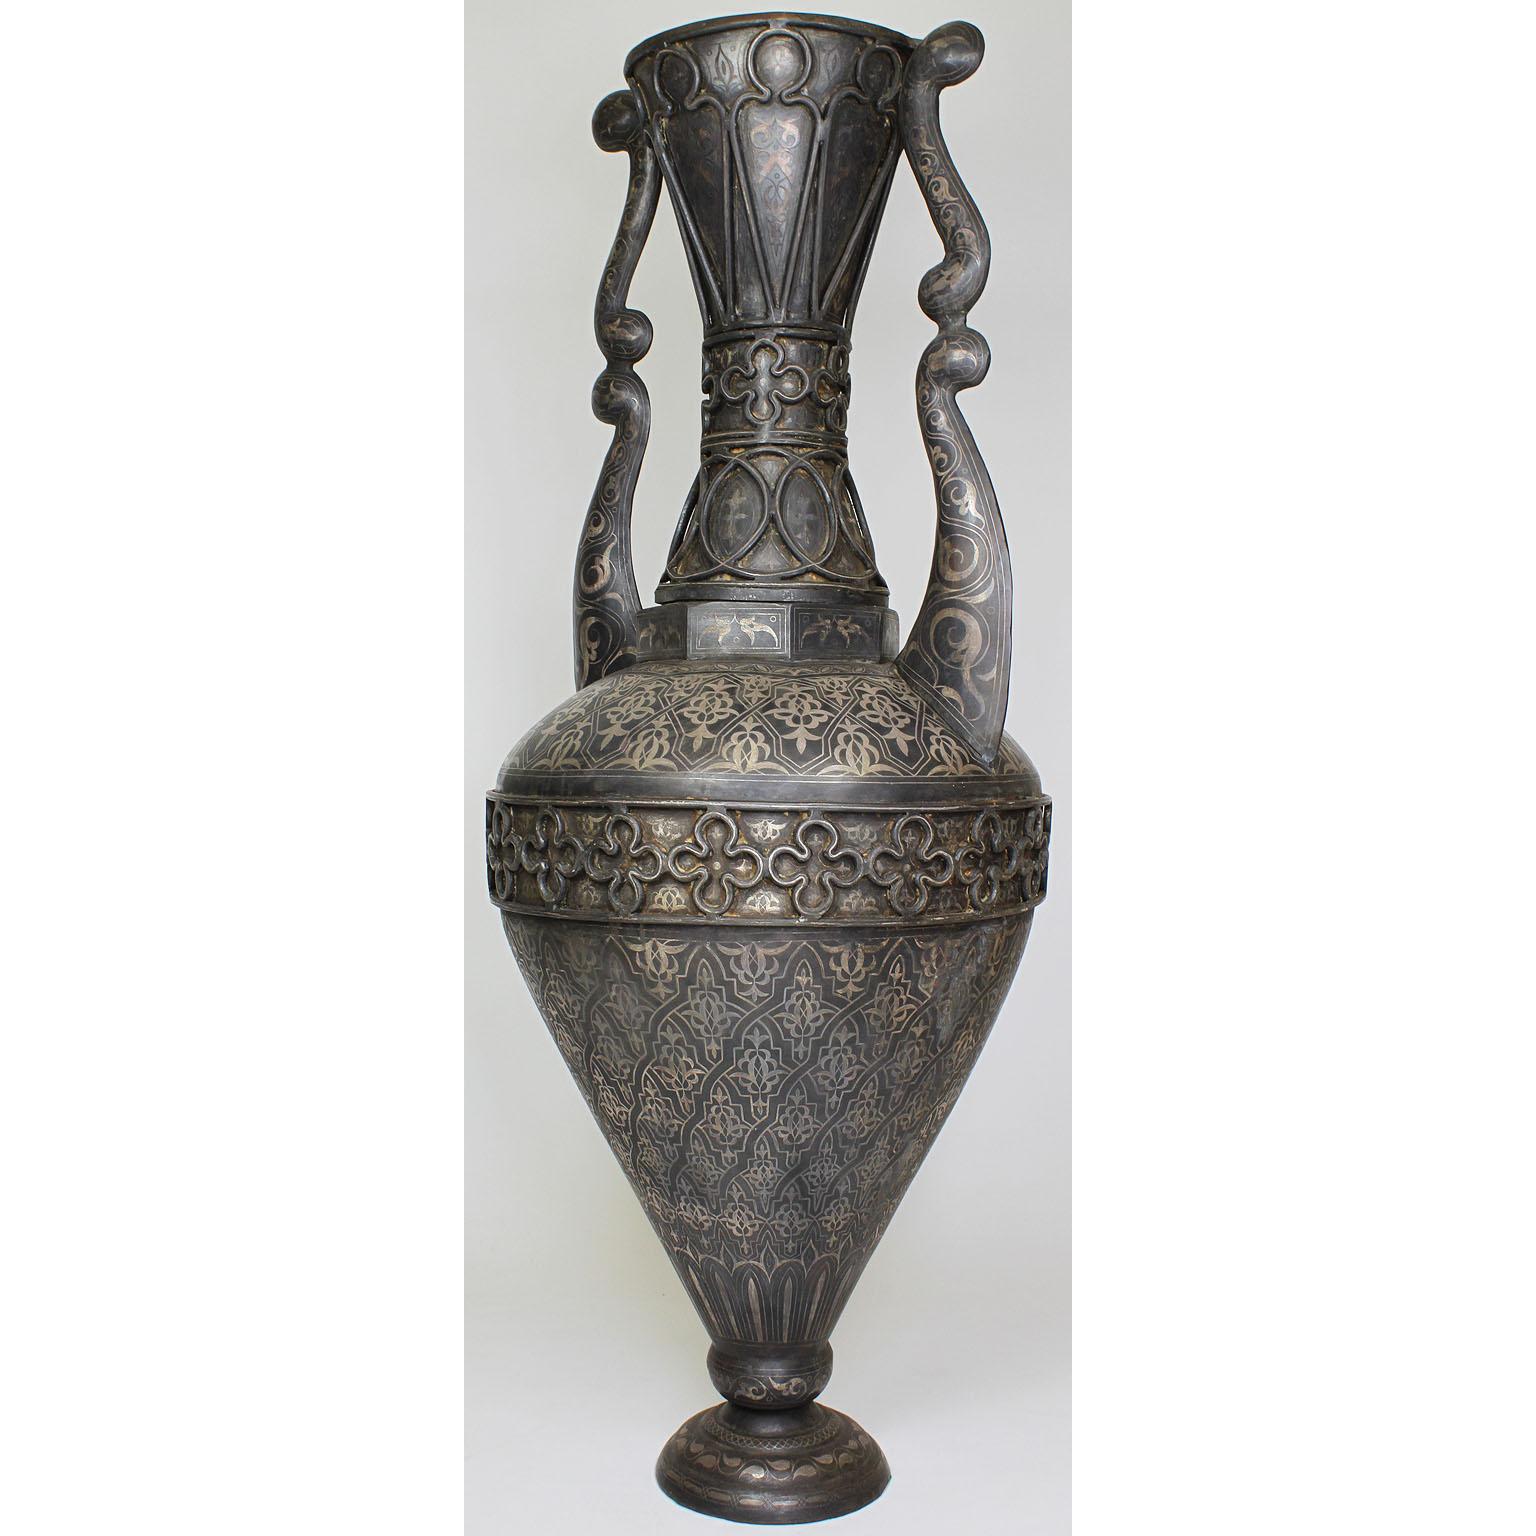 A large Spanish 19th century tooled metal overlaid vase in the style of Plácido Zuloaga (1834-1910). The tall baluster form in the Moorish or Islamic ovoid body vase decorated with arabesque roundels and cartouches against a ground of swirling